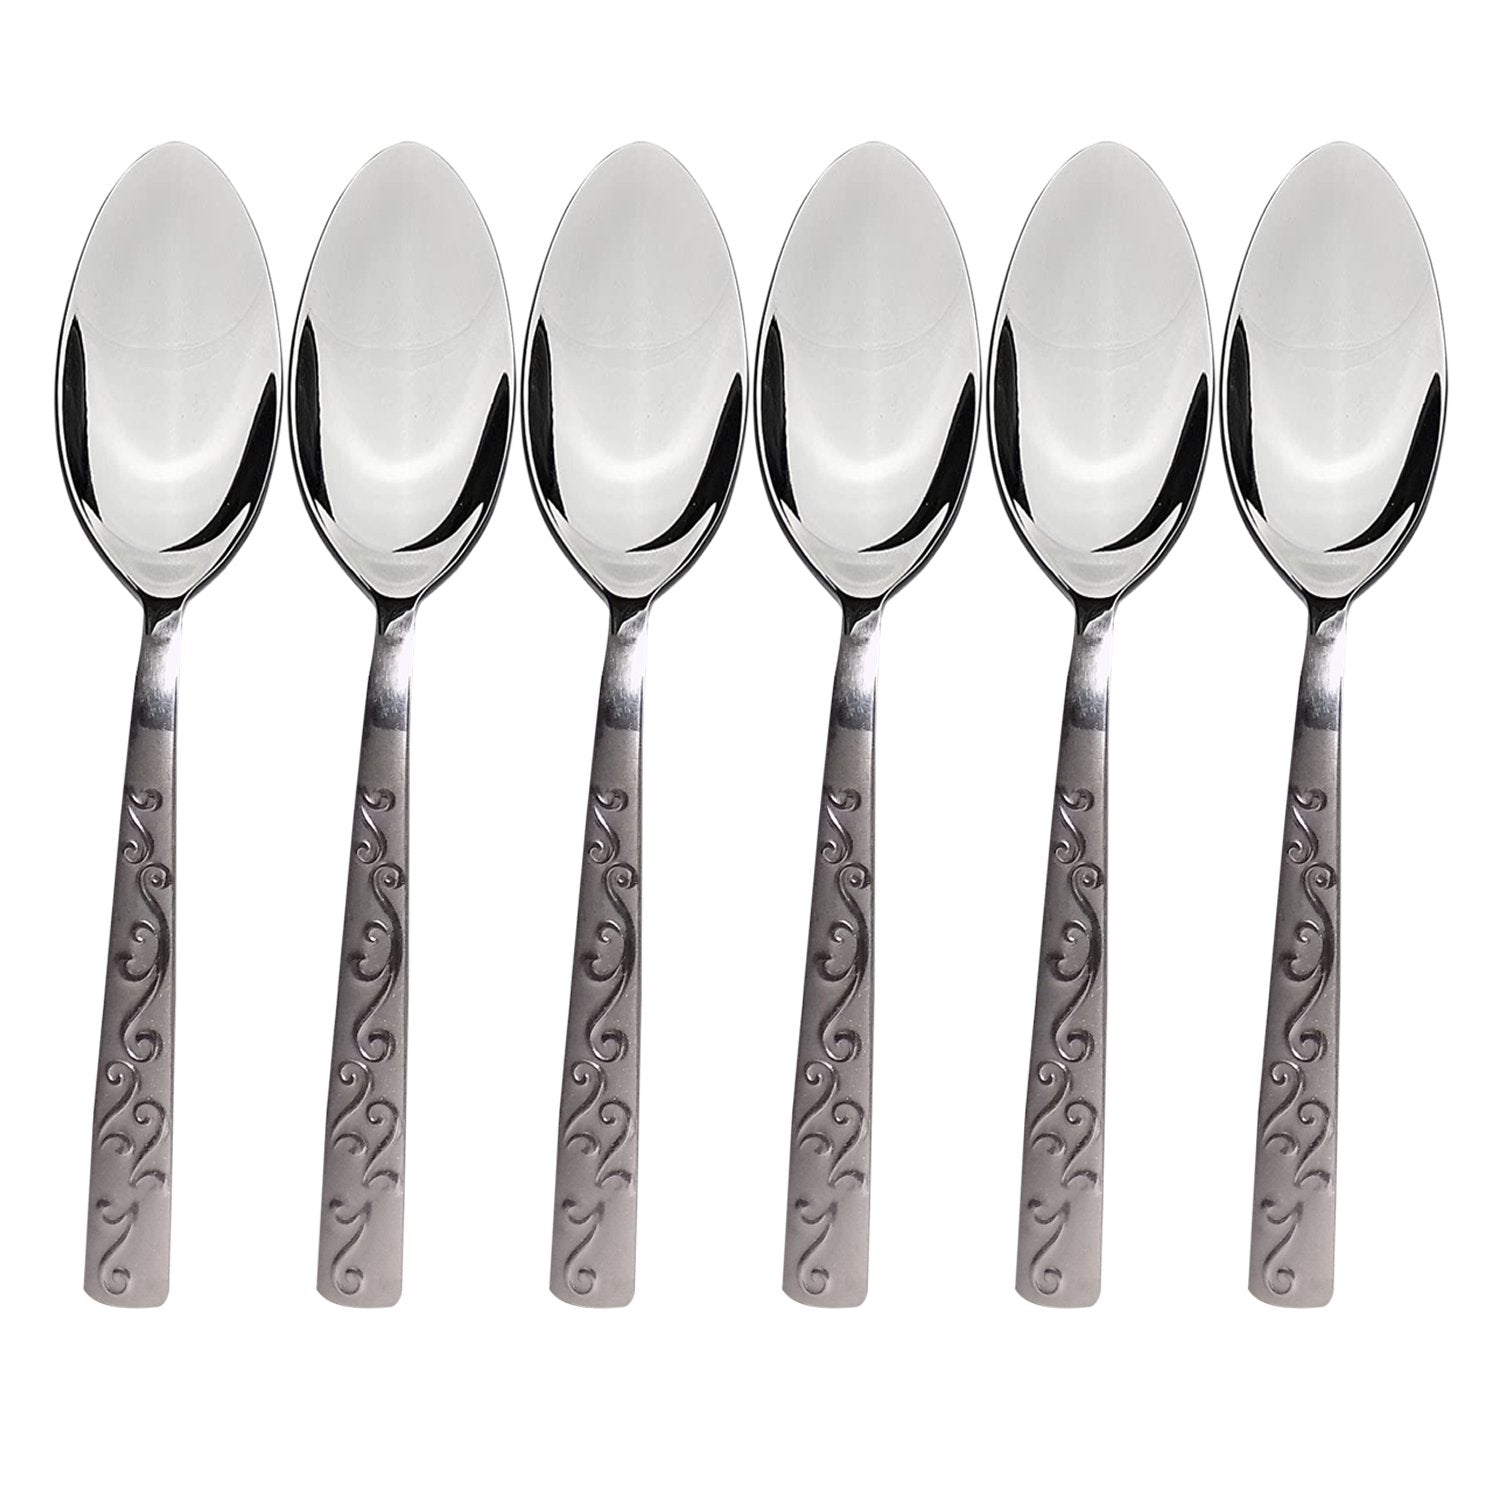 7004 Stainless Steel Big Spoon for Home/Kitchen (Set of 6 Pcs) - SkyShopy